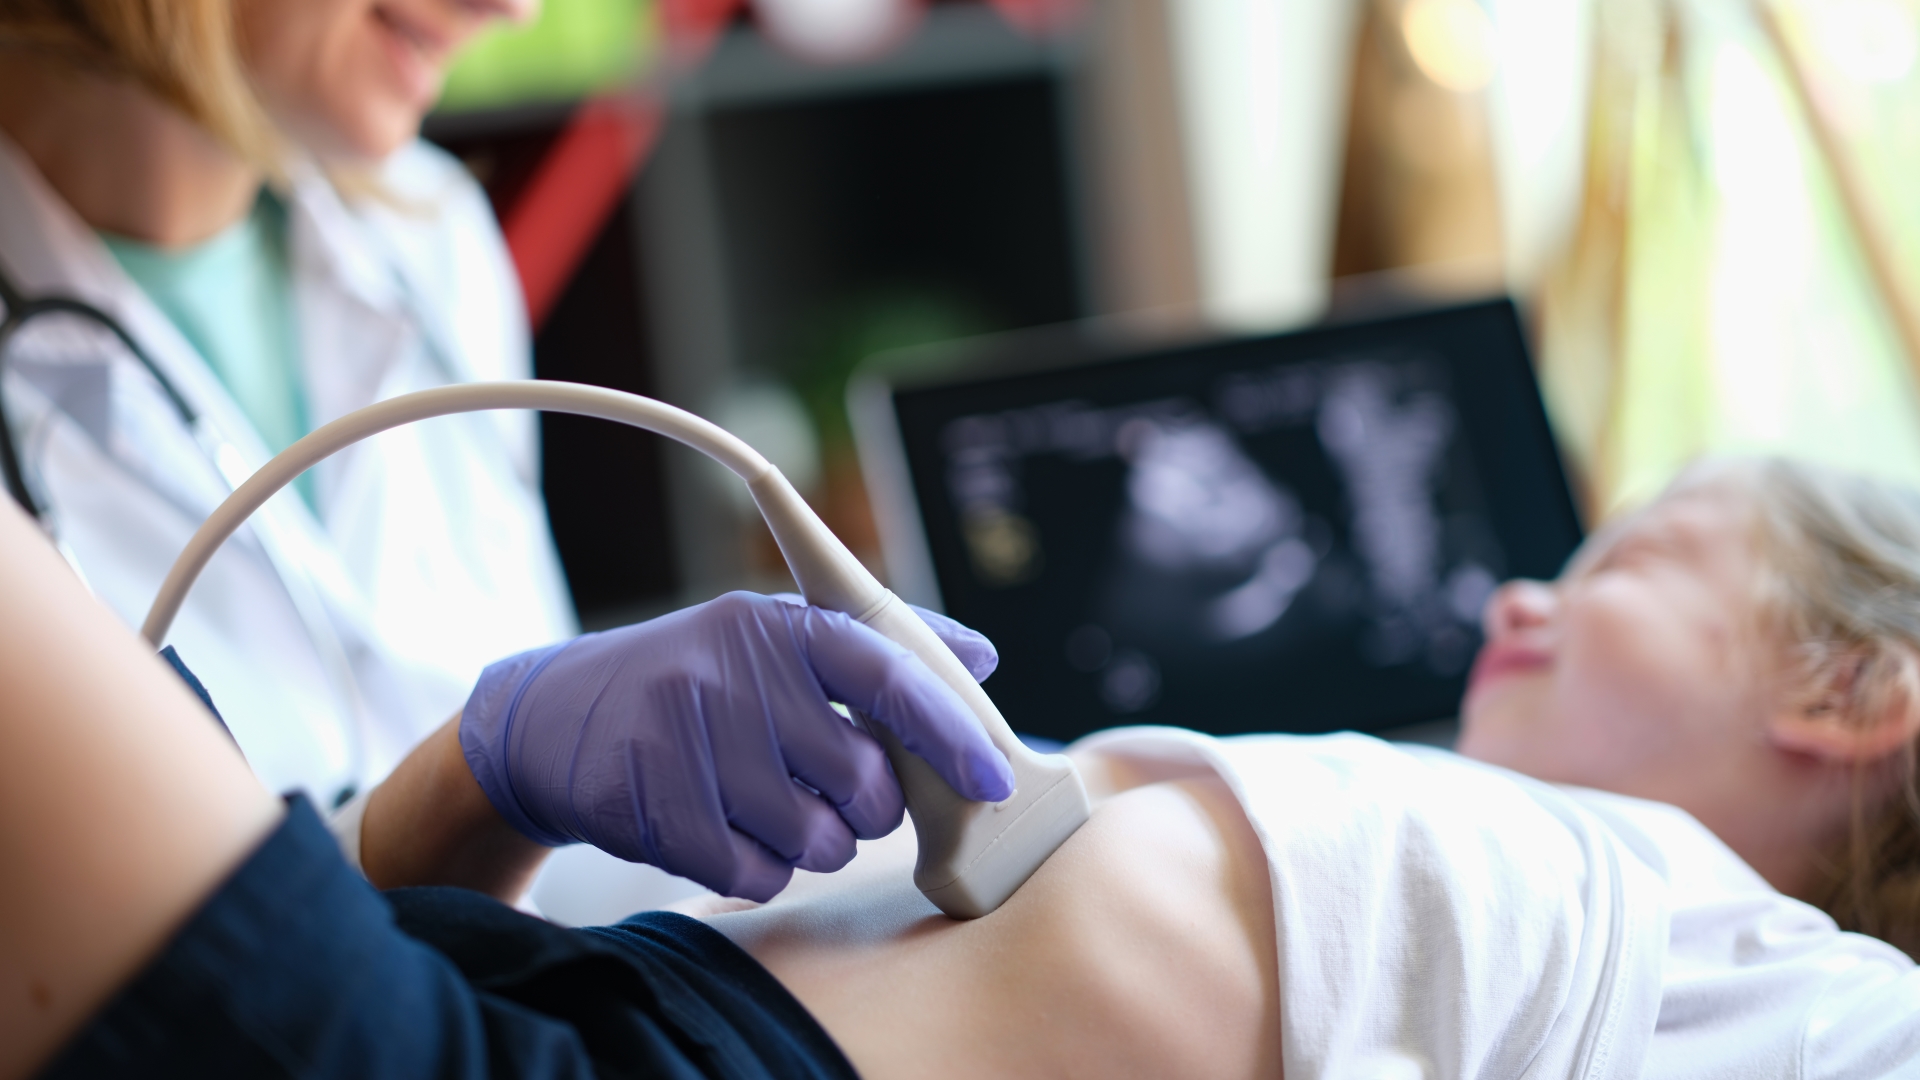 Sonogram vs. Ultrasound: The Differences Revealed 